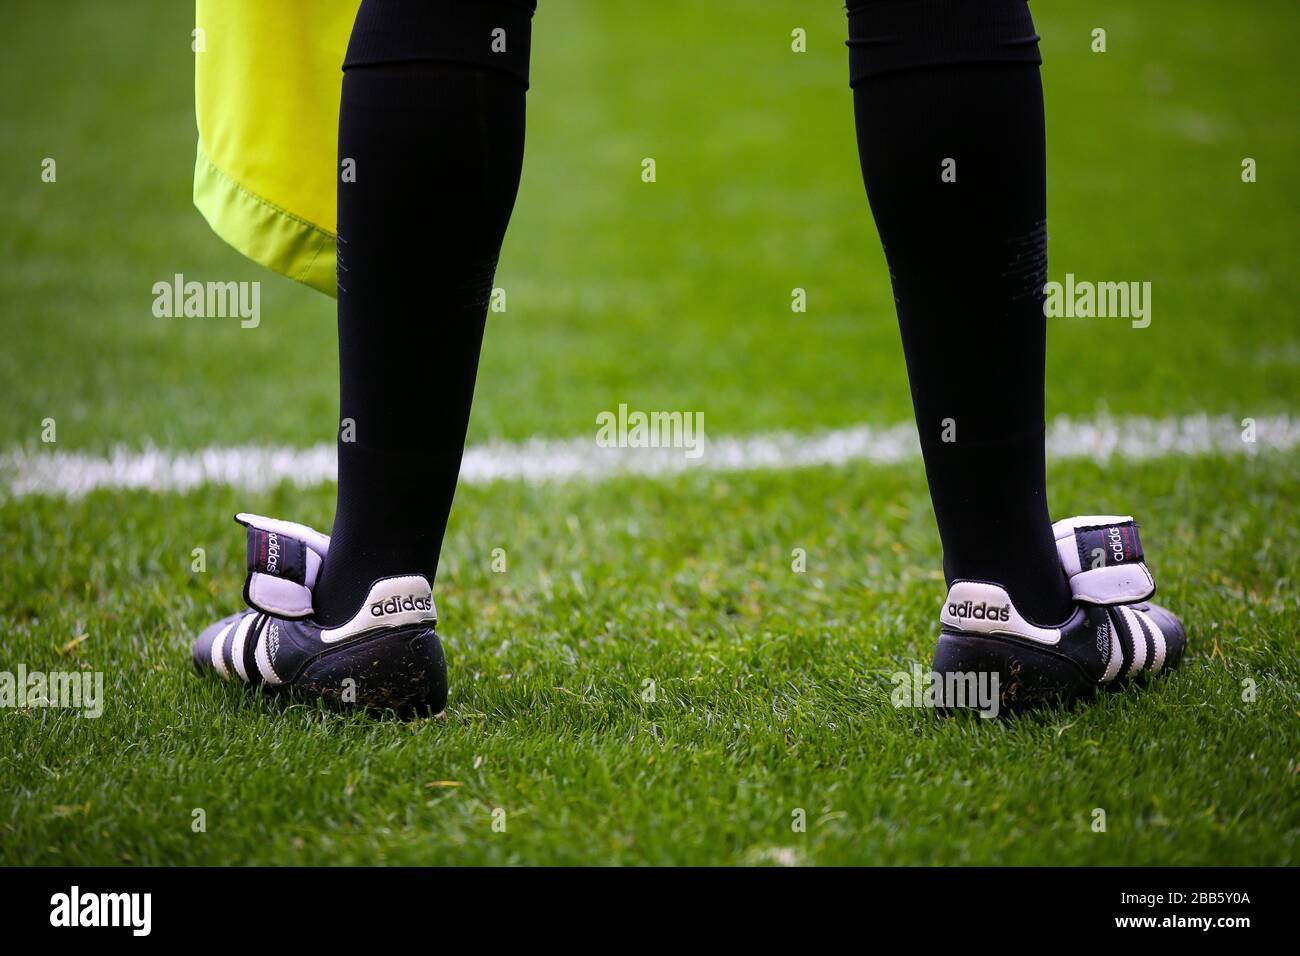 The lineman's Adidas football boots during the Sky Bet League One at St Andrews Stadium. Stock Photo